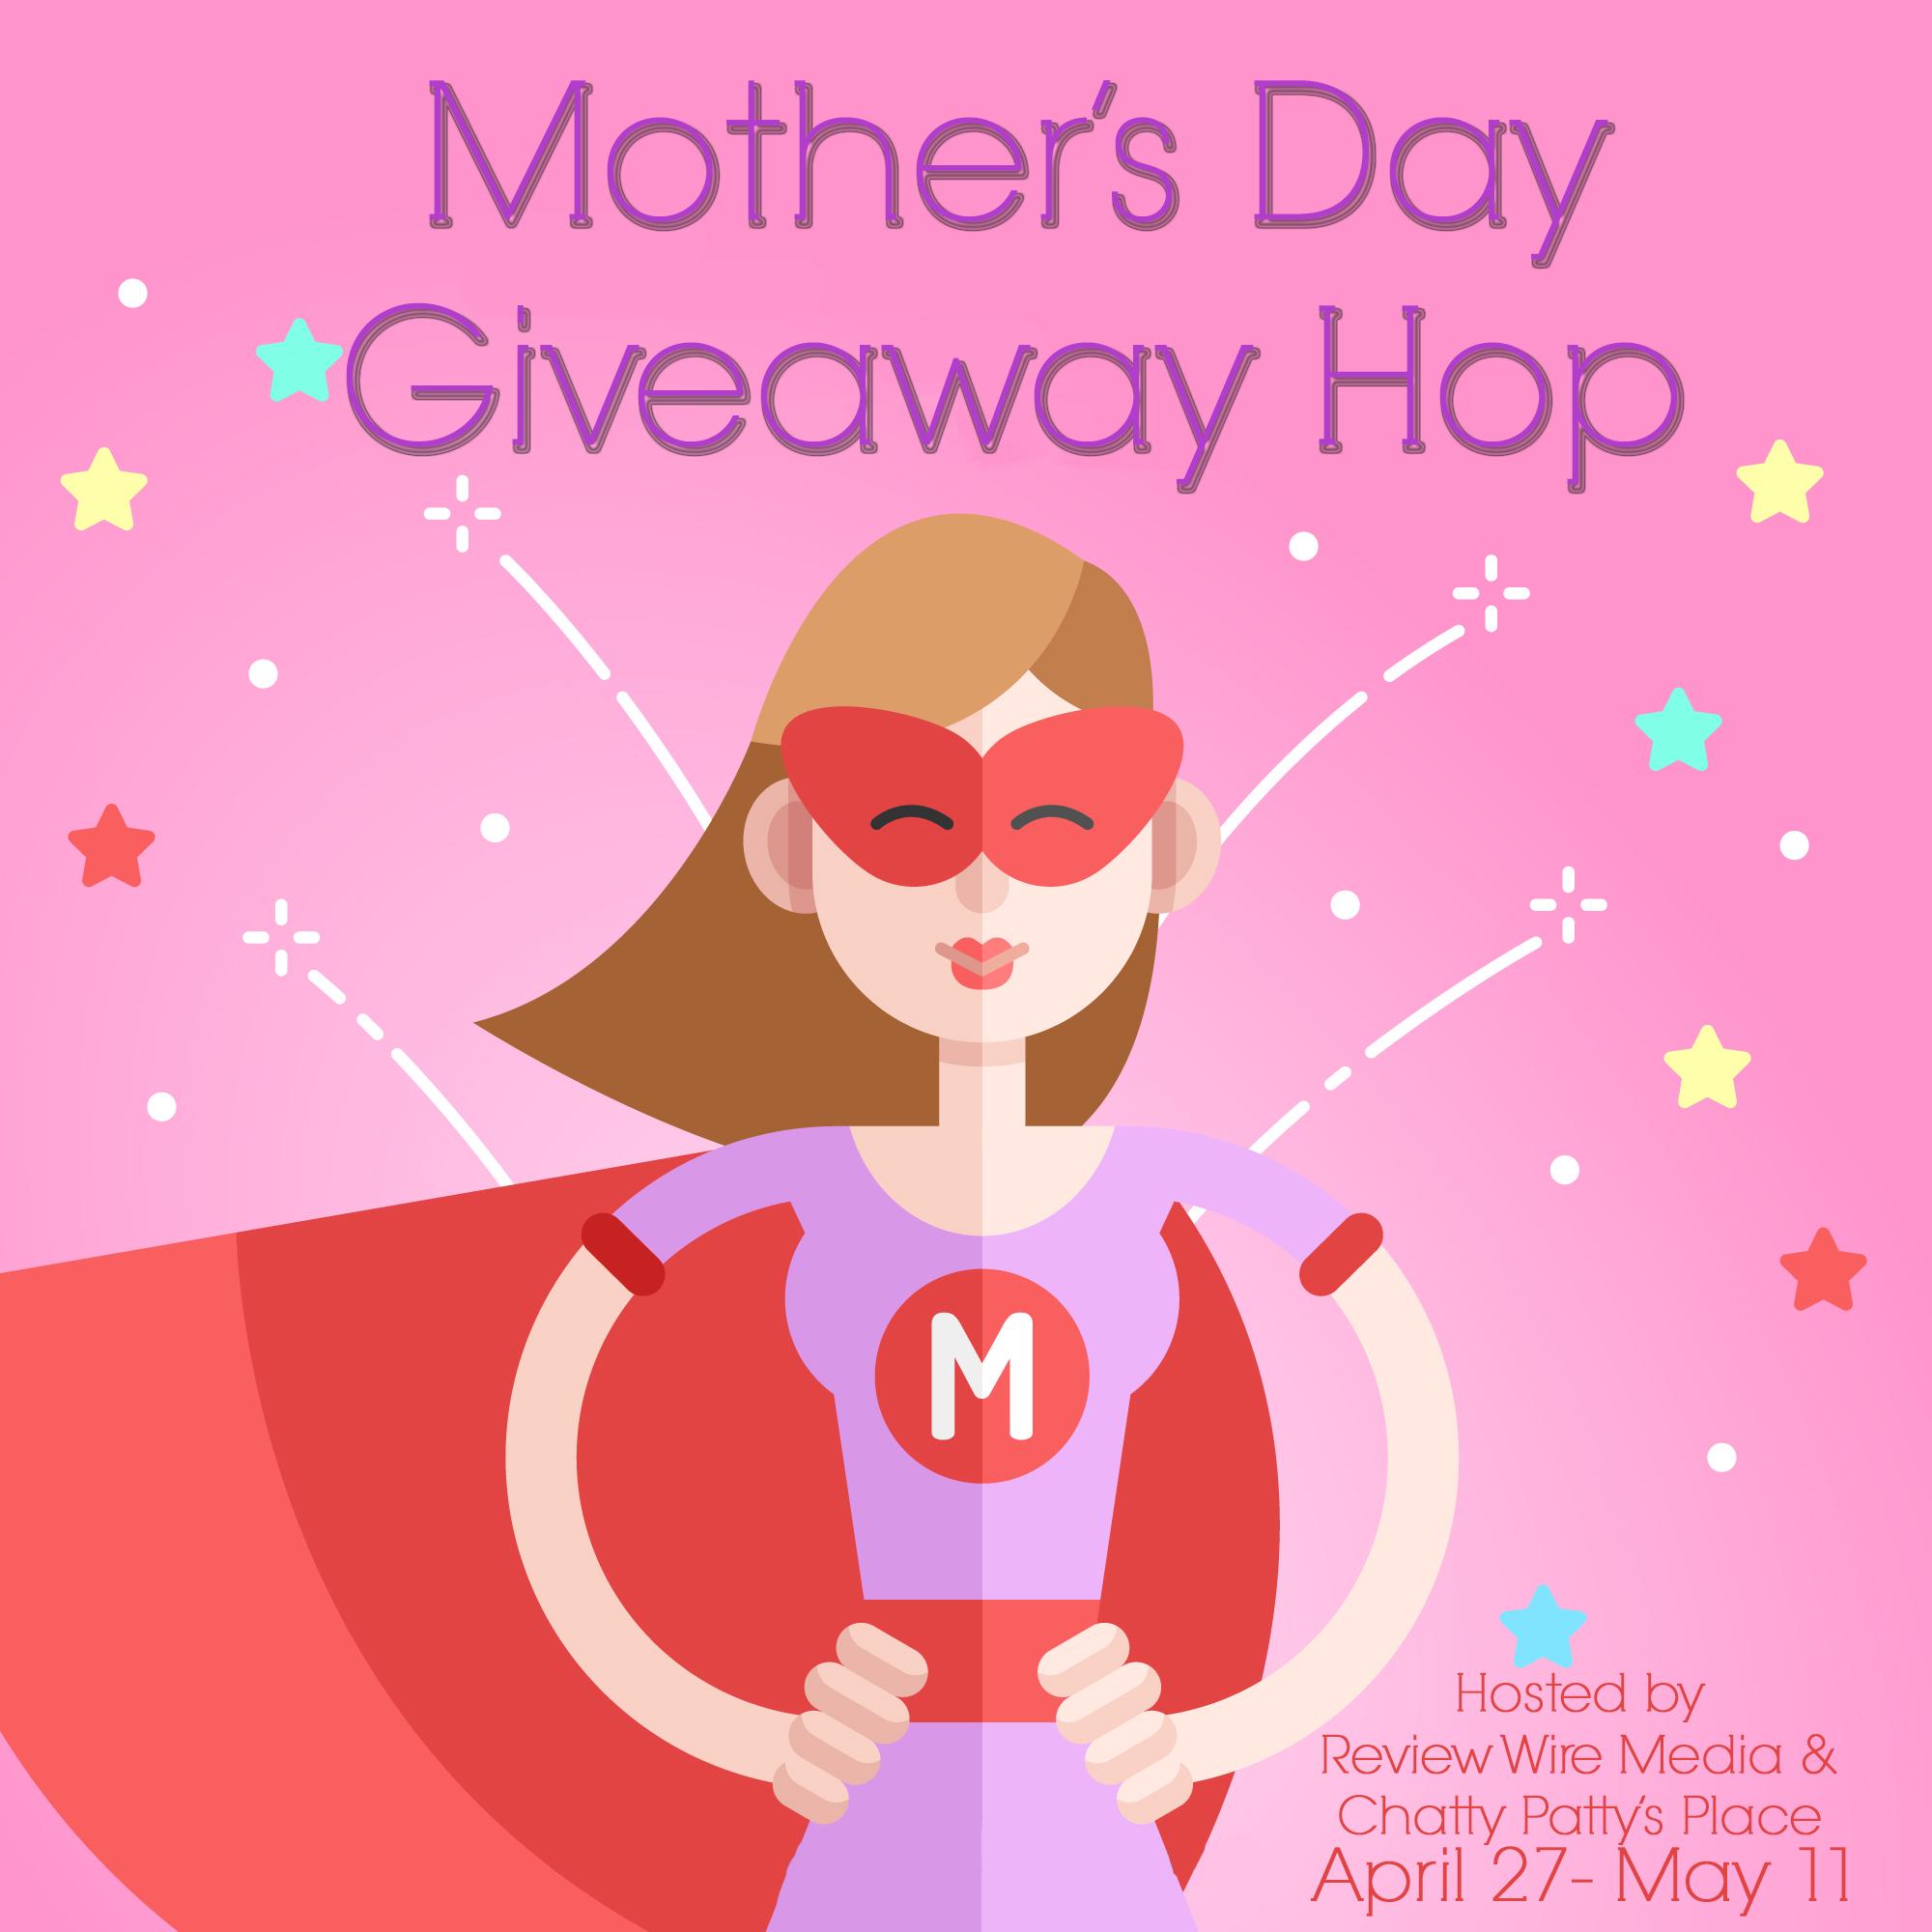 Mother's Day Giveaway Hop 2018